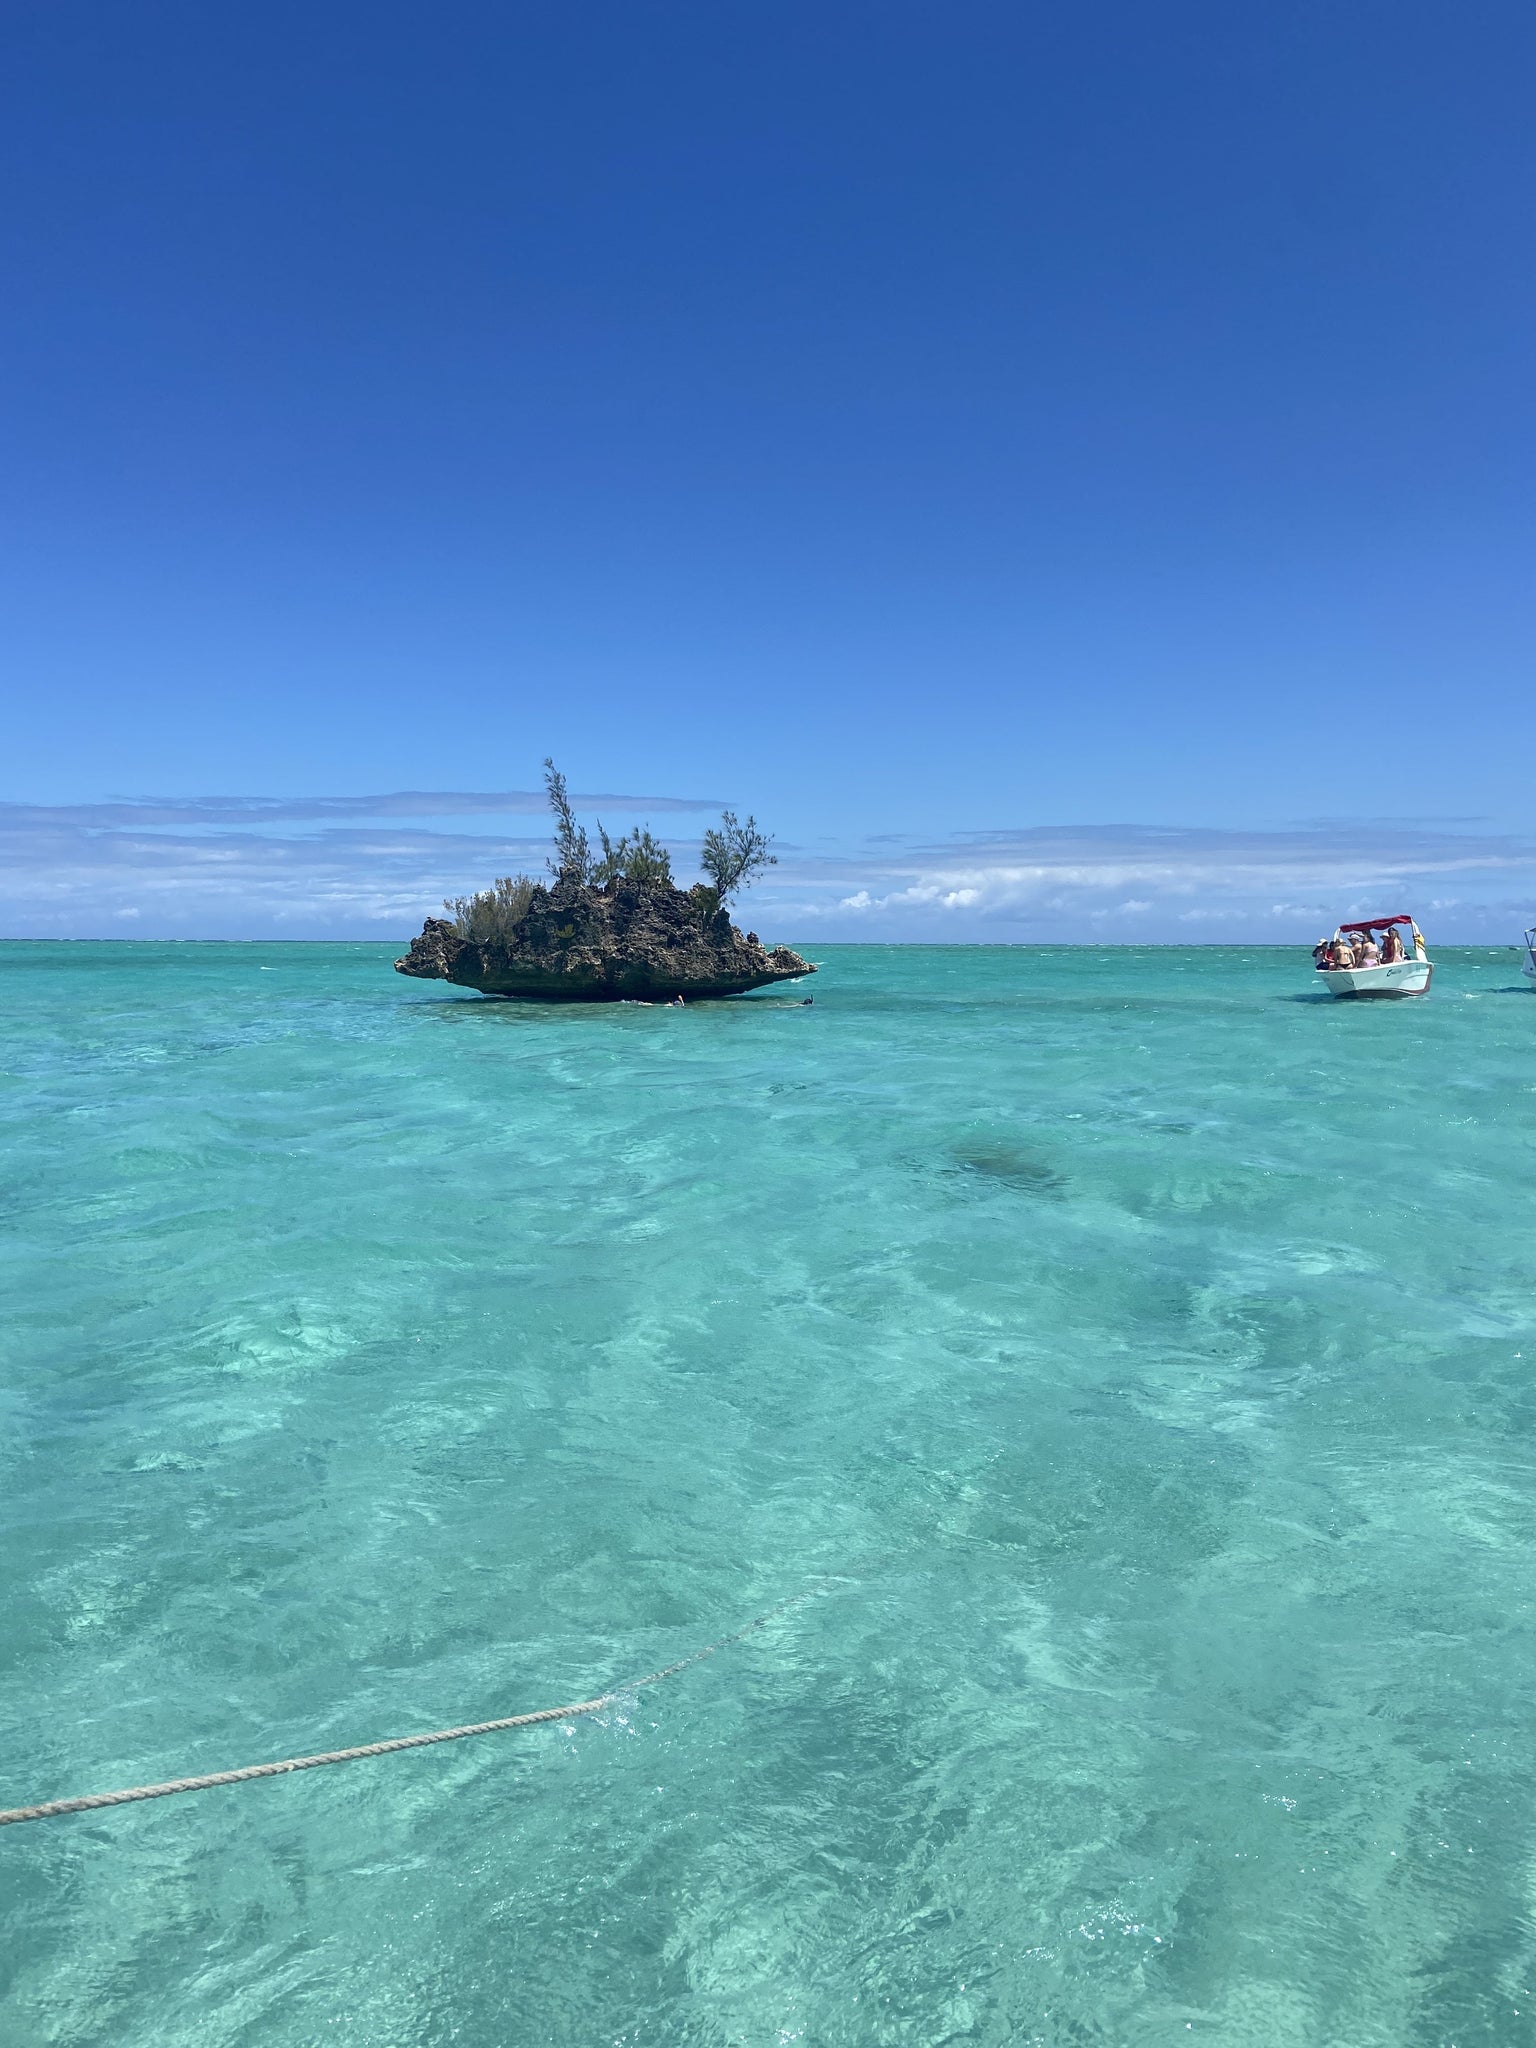 Guided boat tour in Mauritius with beautiful coral reefs